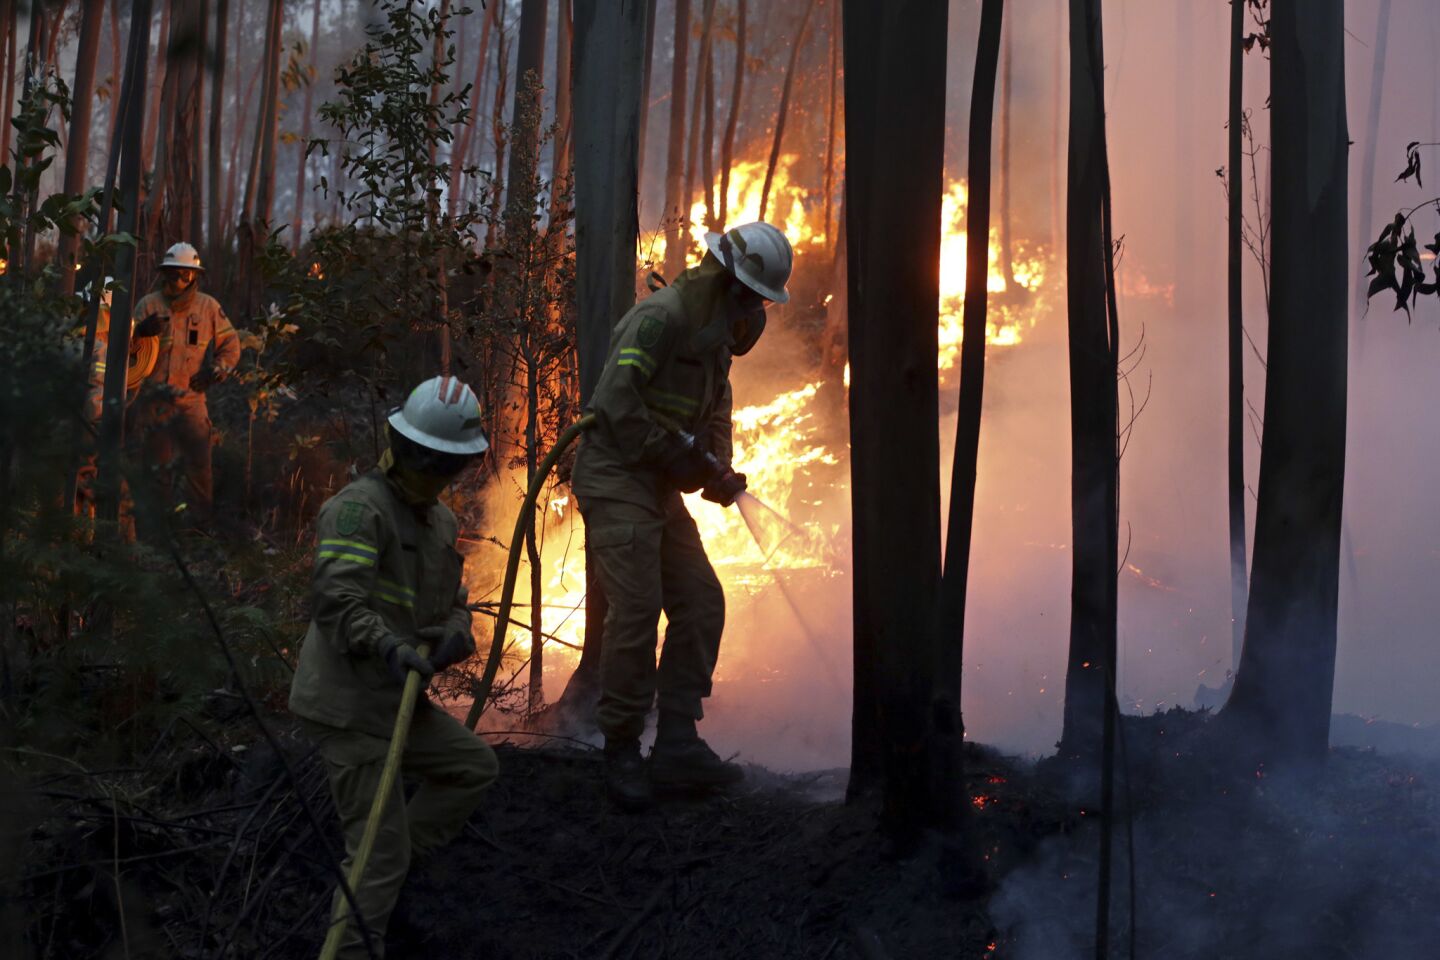 Firefighters battle flames near the village of Avelar, in central Portugal, at sunrise Sunday.